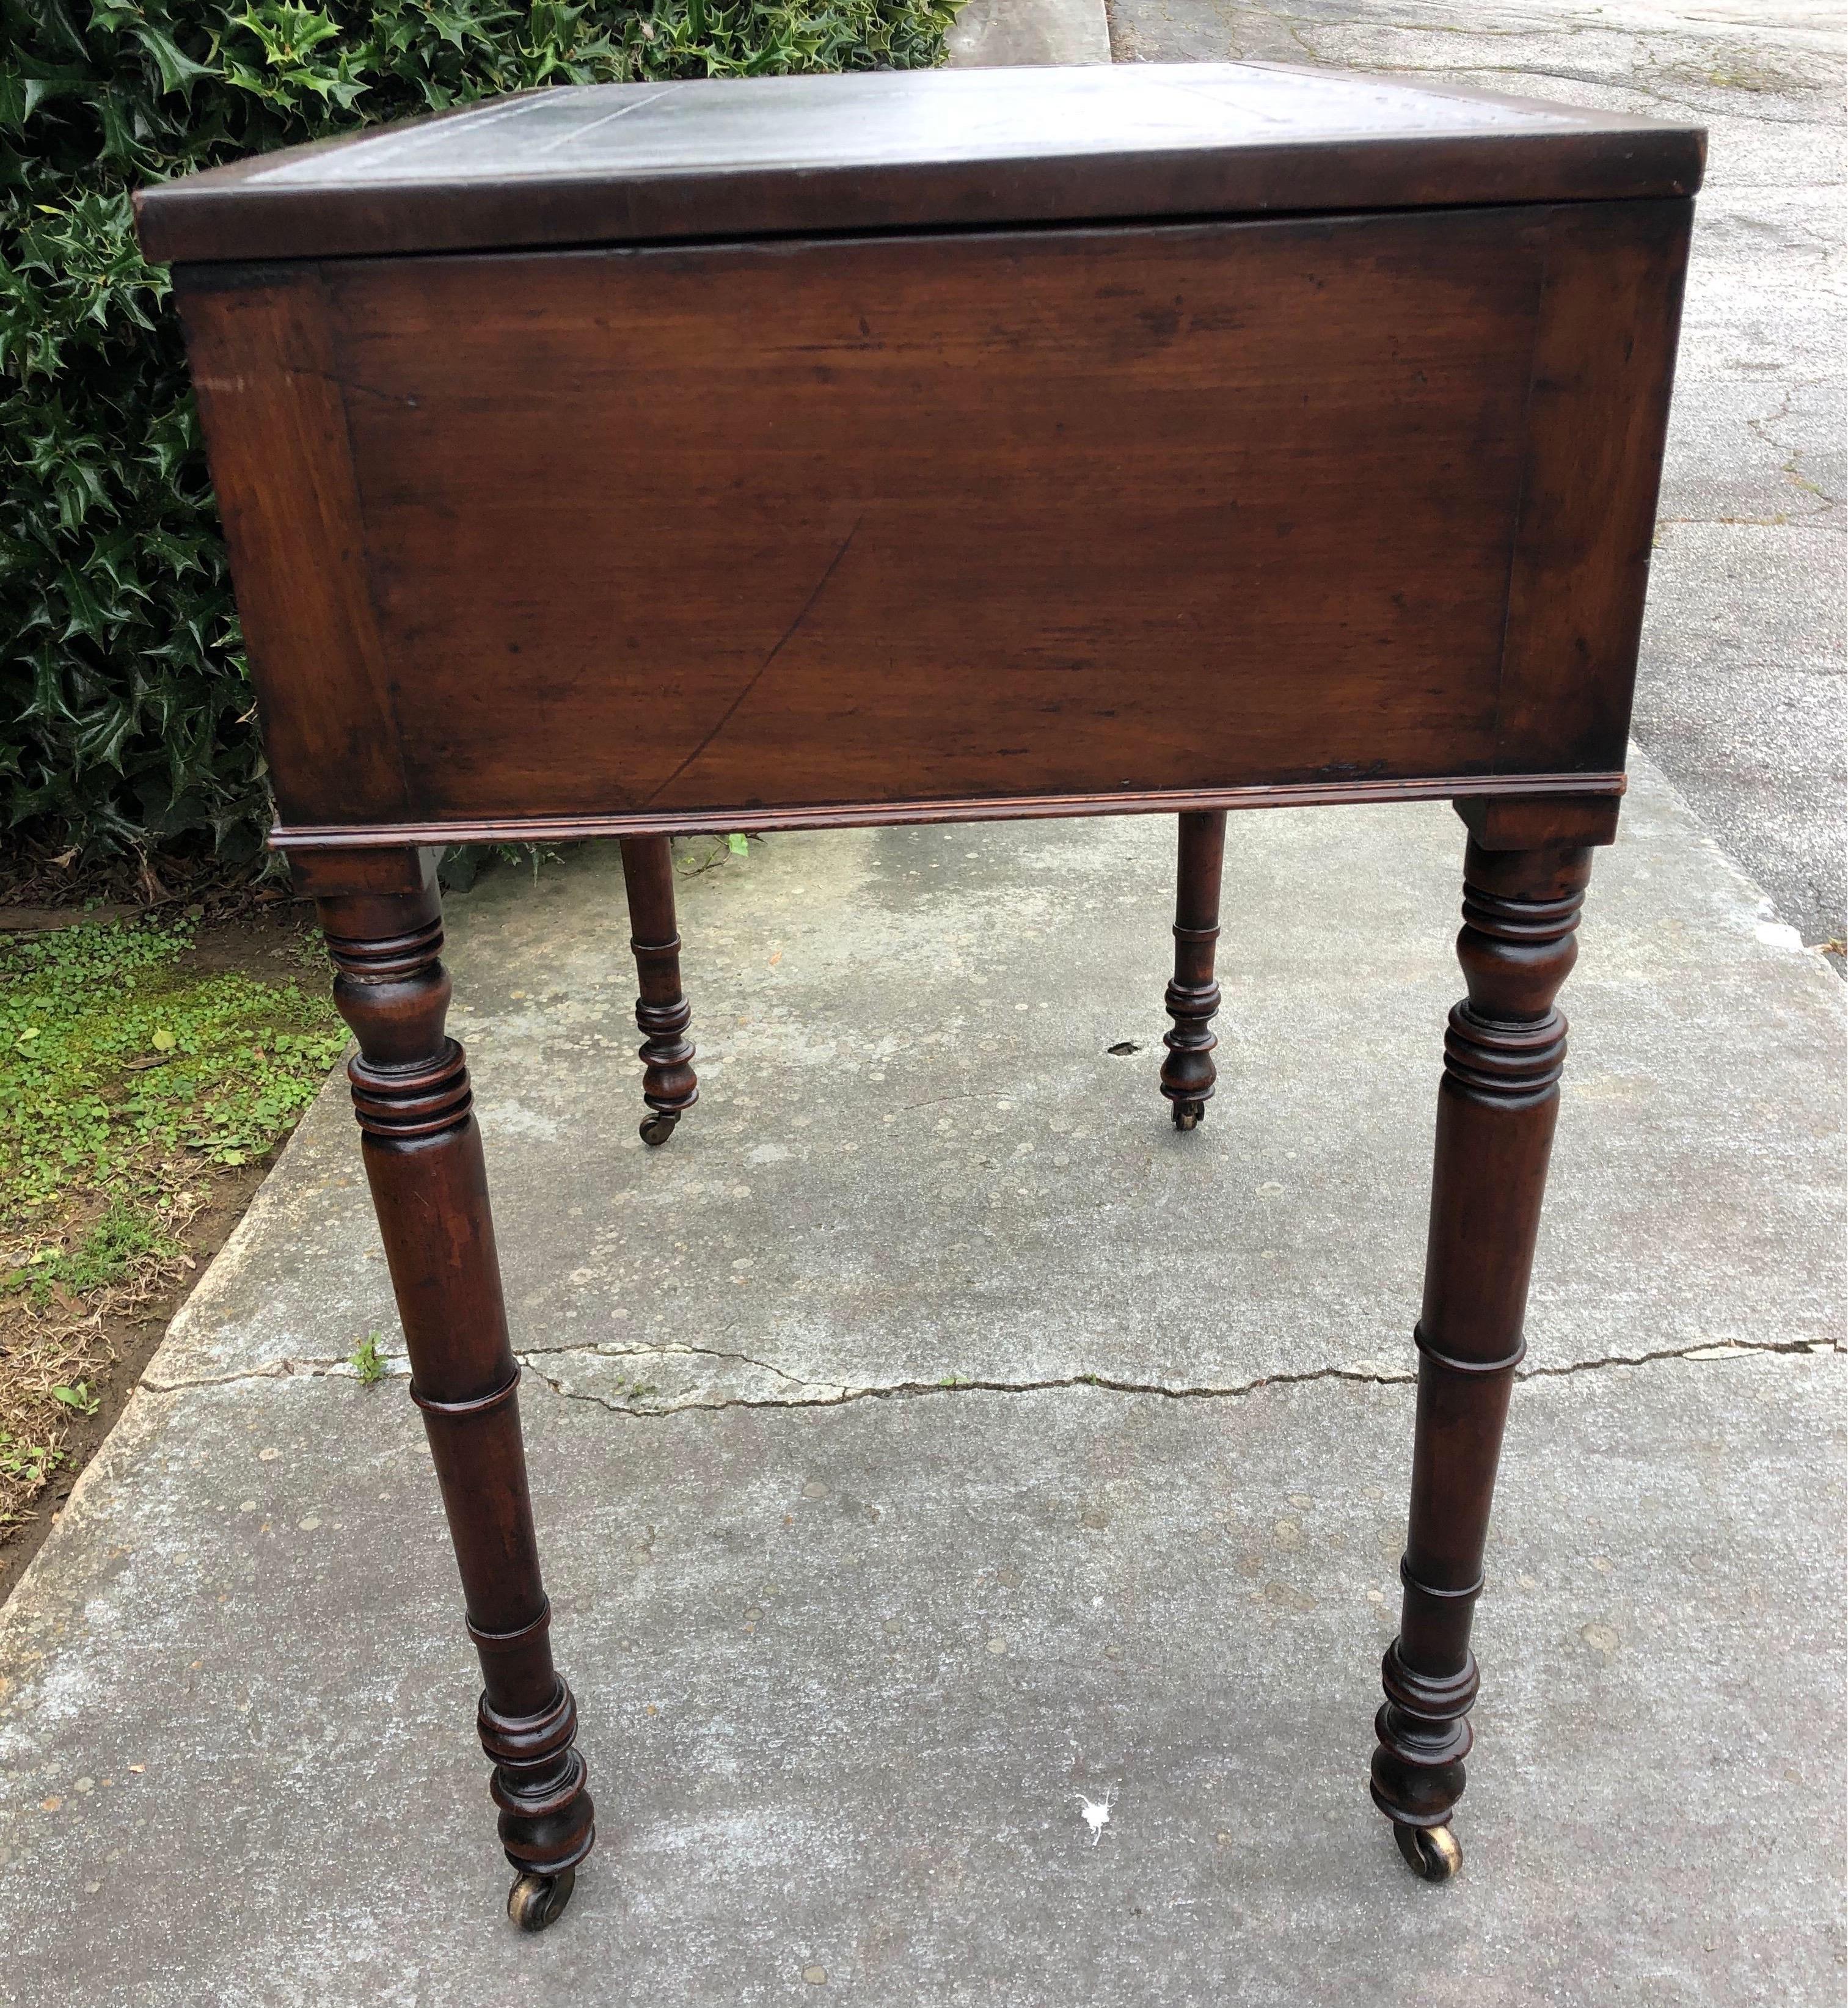 19th Century English Mahogany and Leather Top Architect's Style Desk For Sale 2